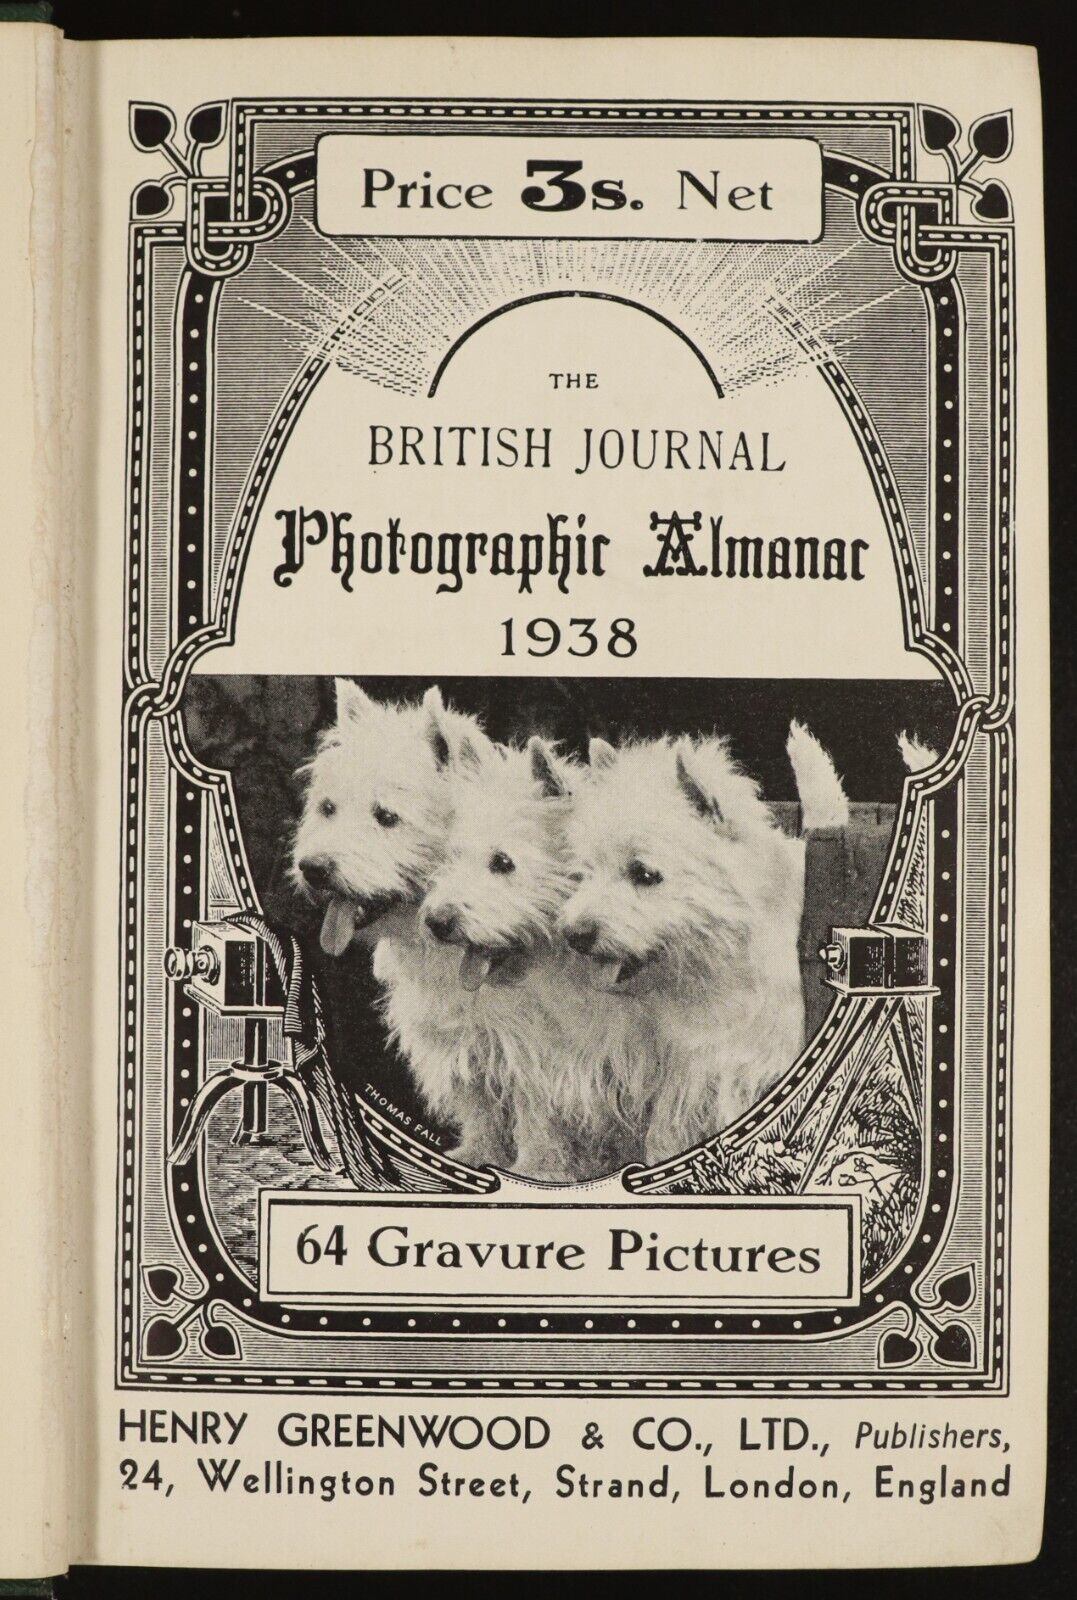 1938 The British Journal Photographic Almanac Antique Camera Reference Book